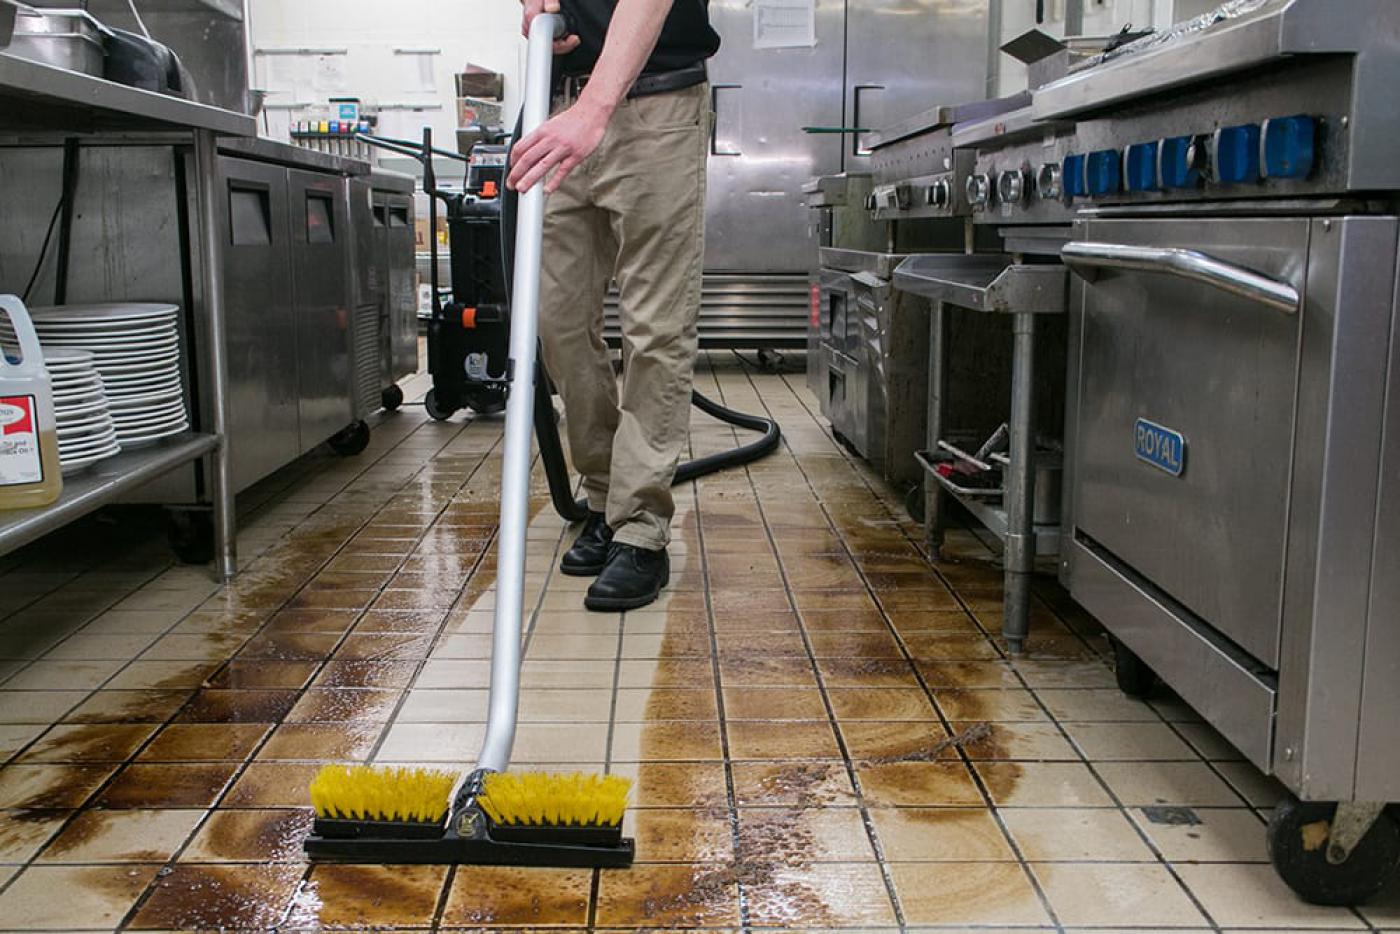 Remove Grease From Restaurant Floors, How To Clean Greasy Floor Tiles